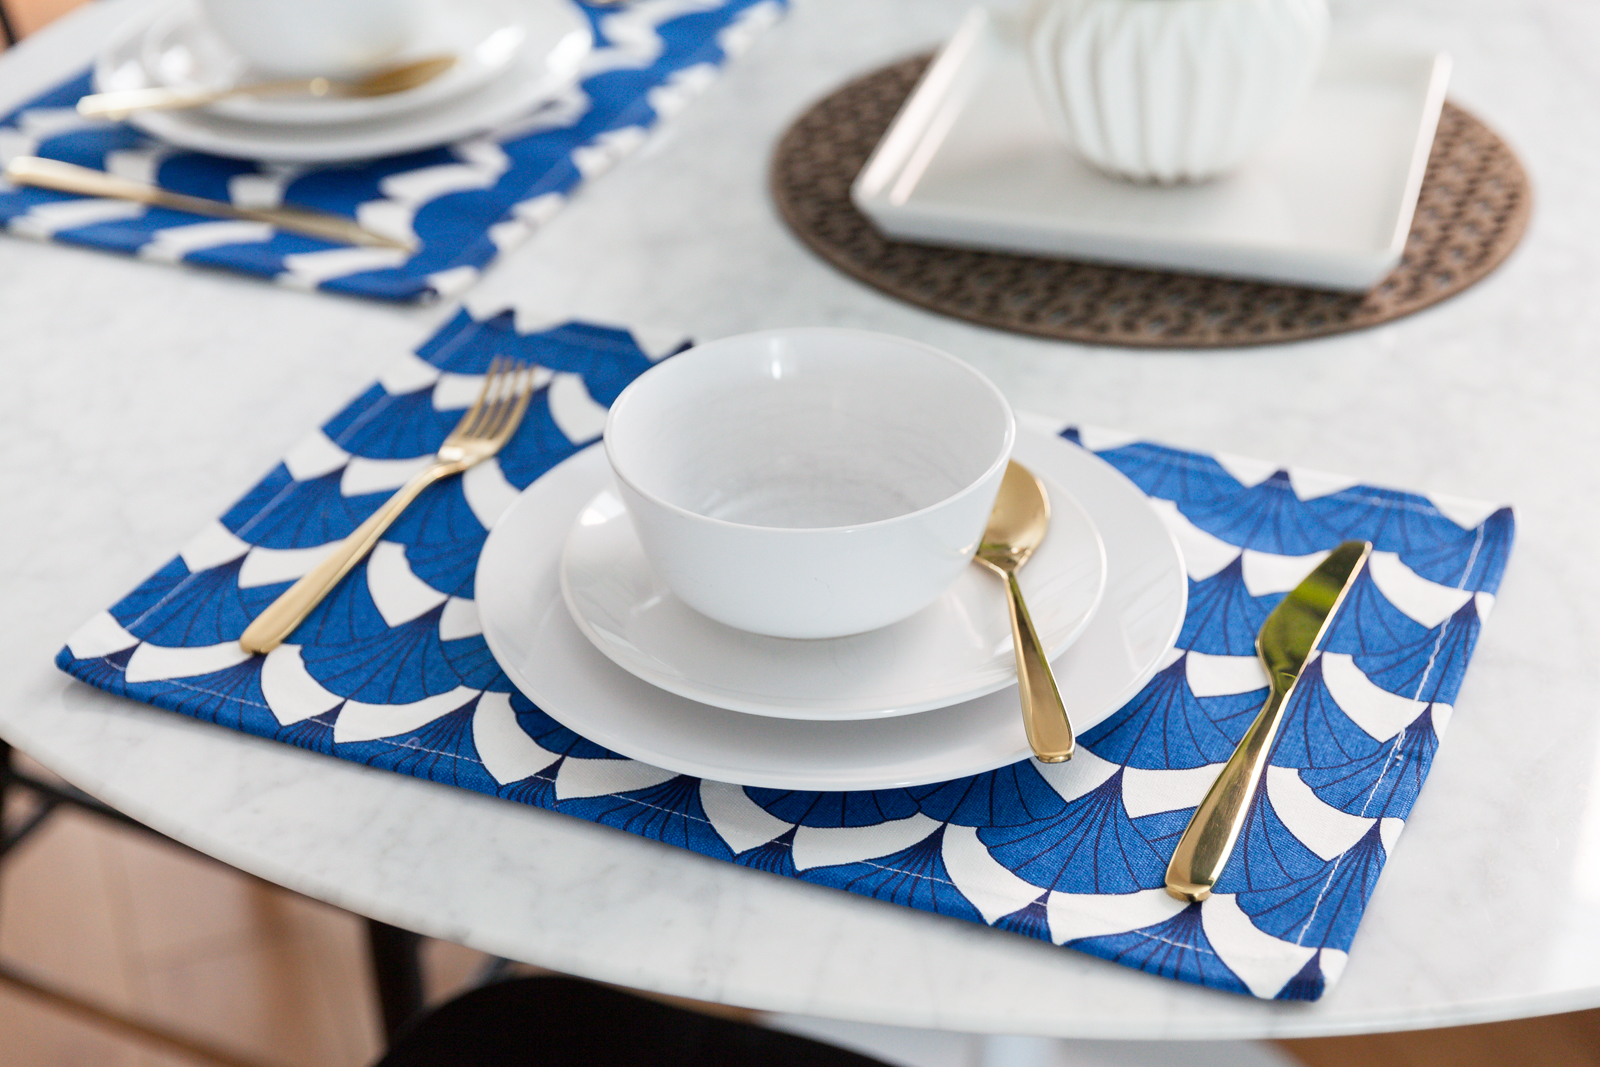 A bold white and blue placemat on a kitchen table